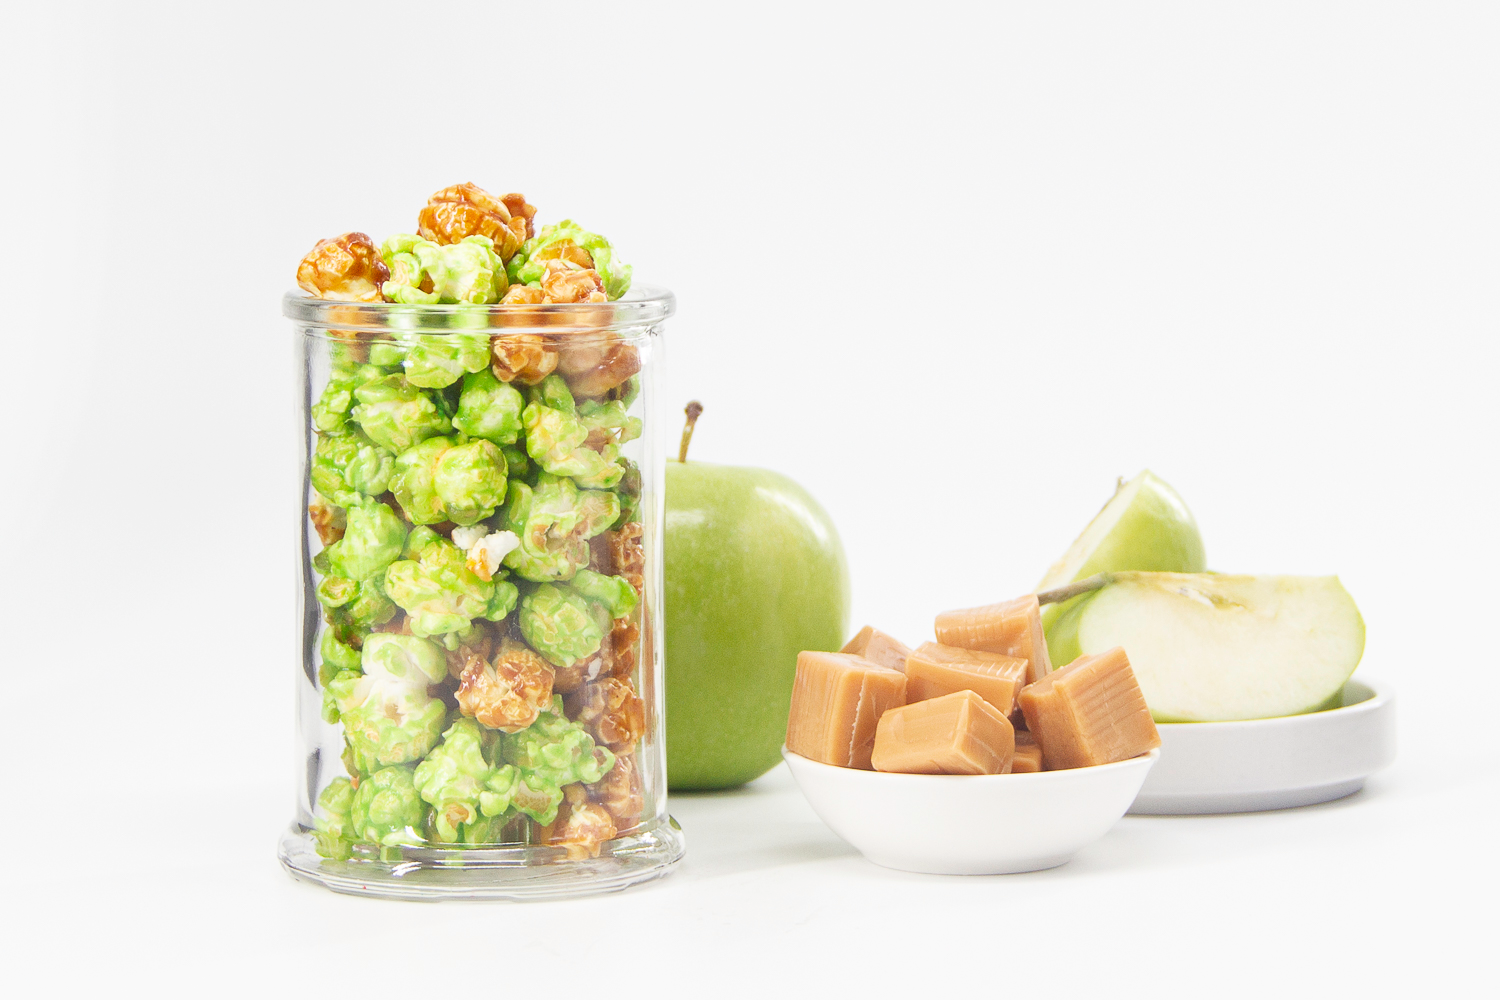 Caramel Corn and Apple Popcorn displayed in glass with apple slices and caramel candies